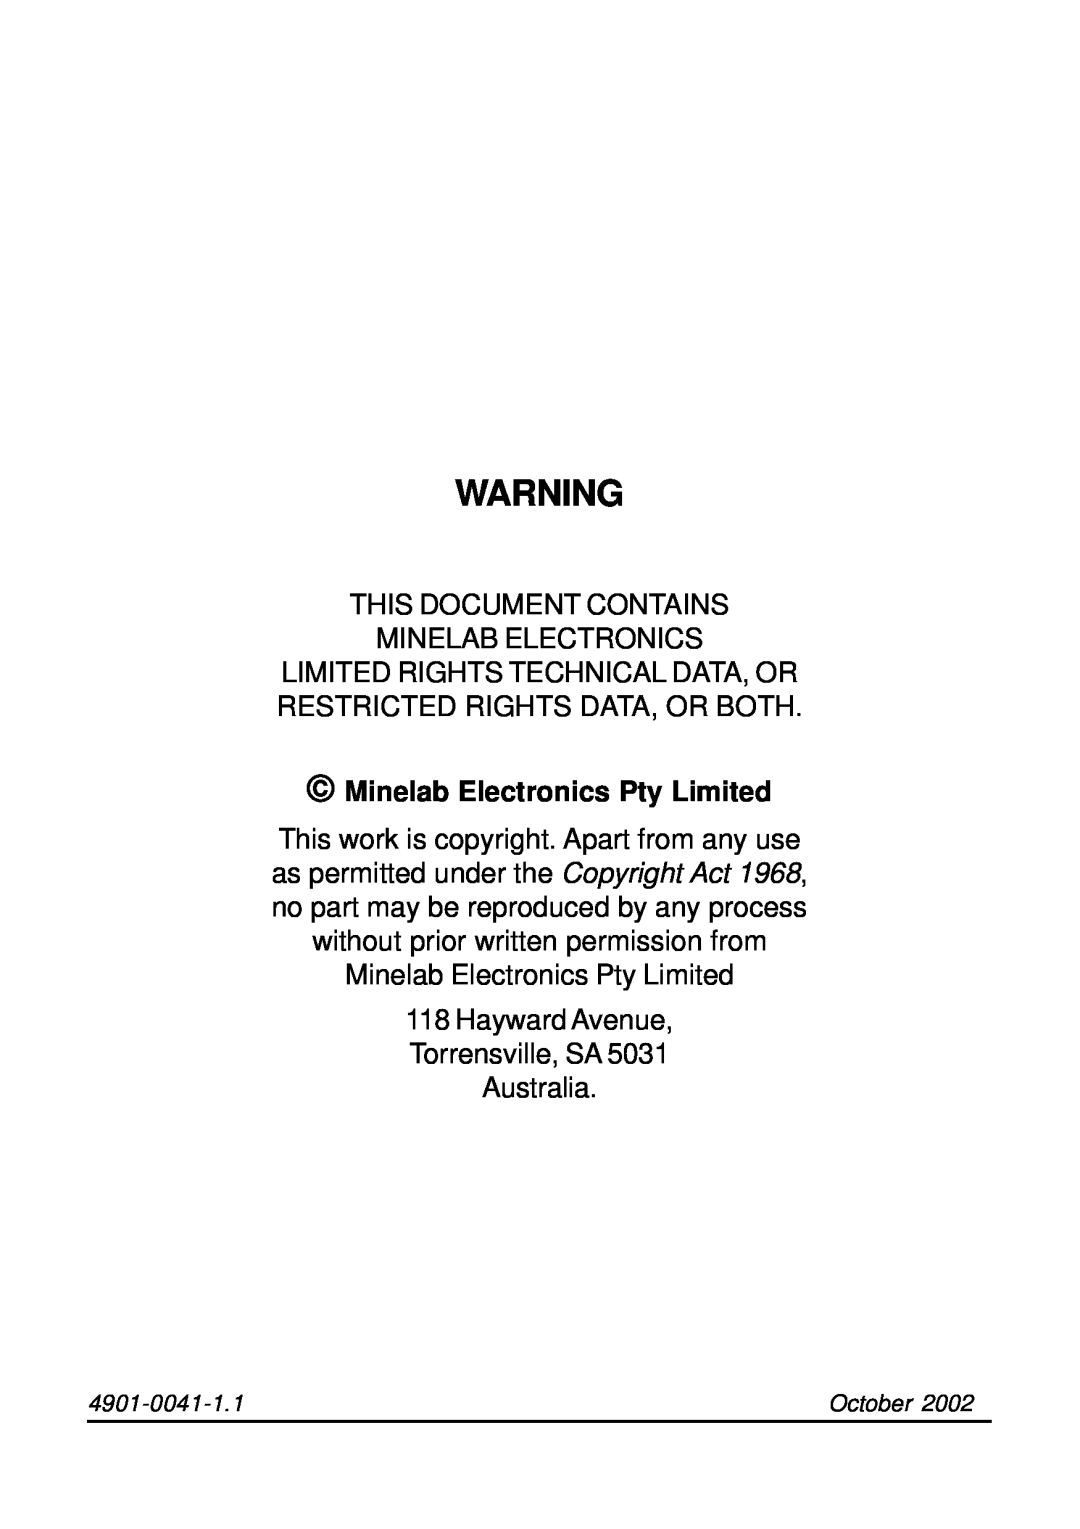 Minelab SD2100v2 Minelab Electronics Pty Limited, This Document Contains Minelab Electronics, 4901-0041-1.1, October 